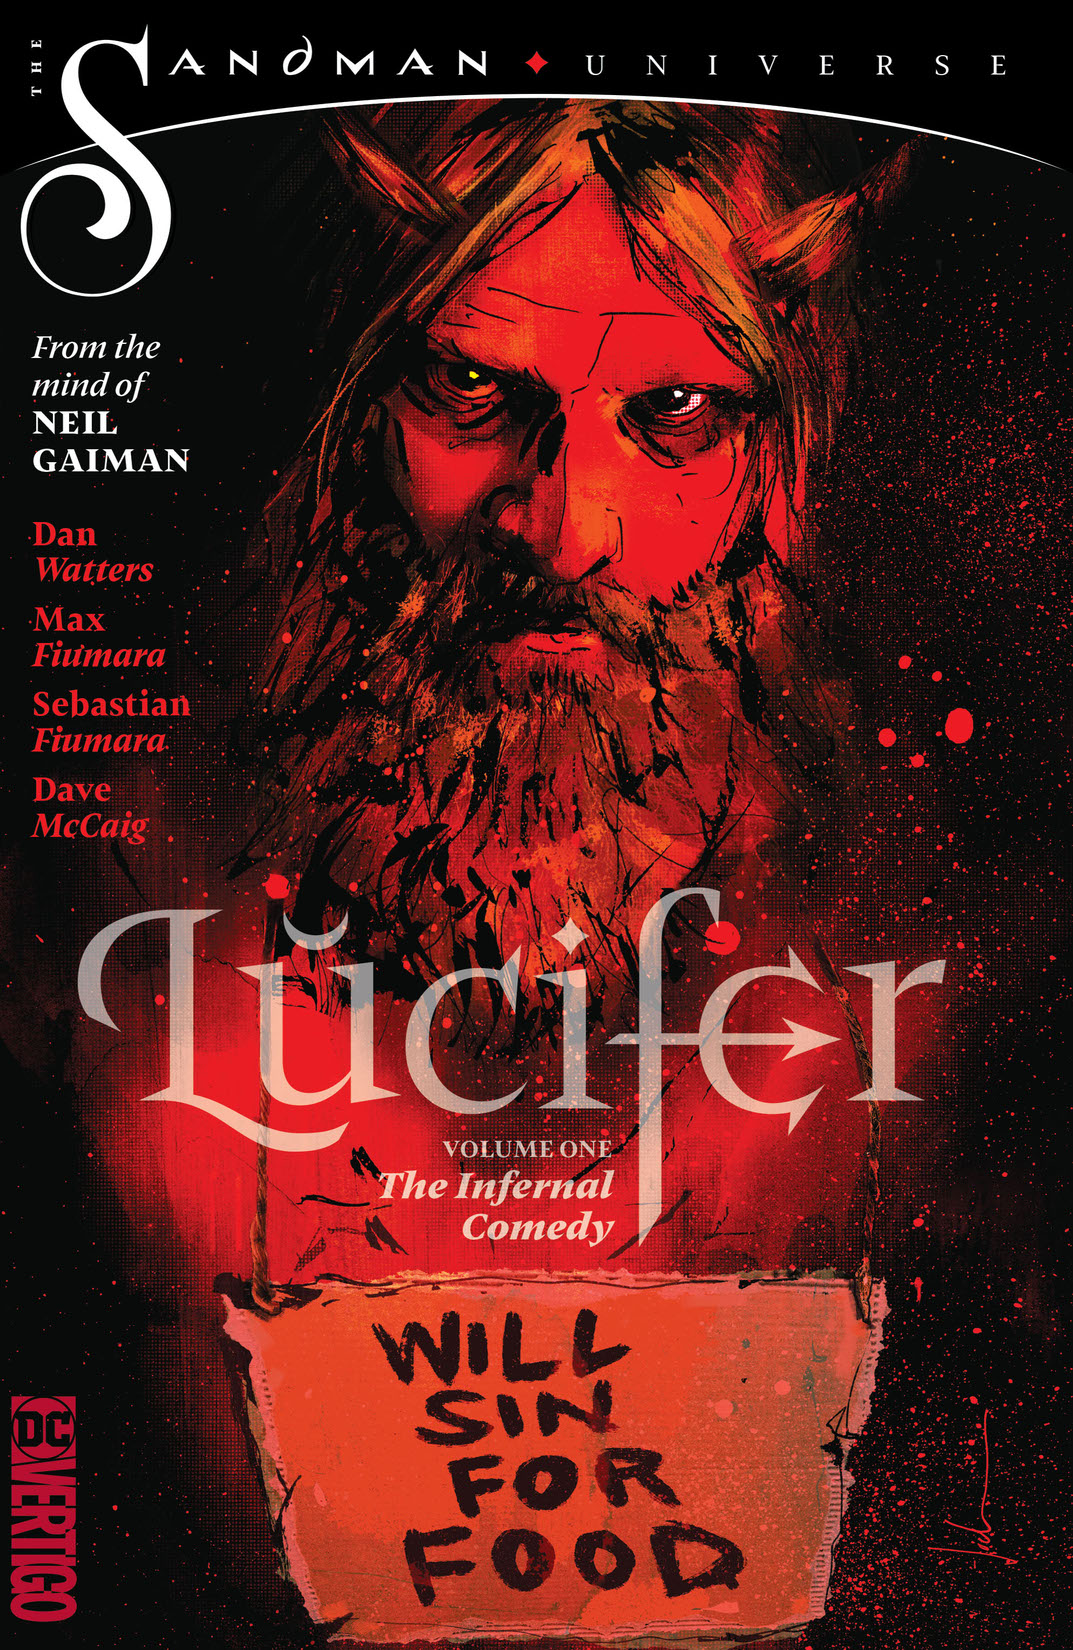 Lucifer Vol. 1: The Infernal Comedy preview images